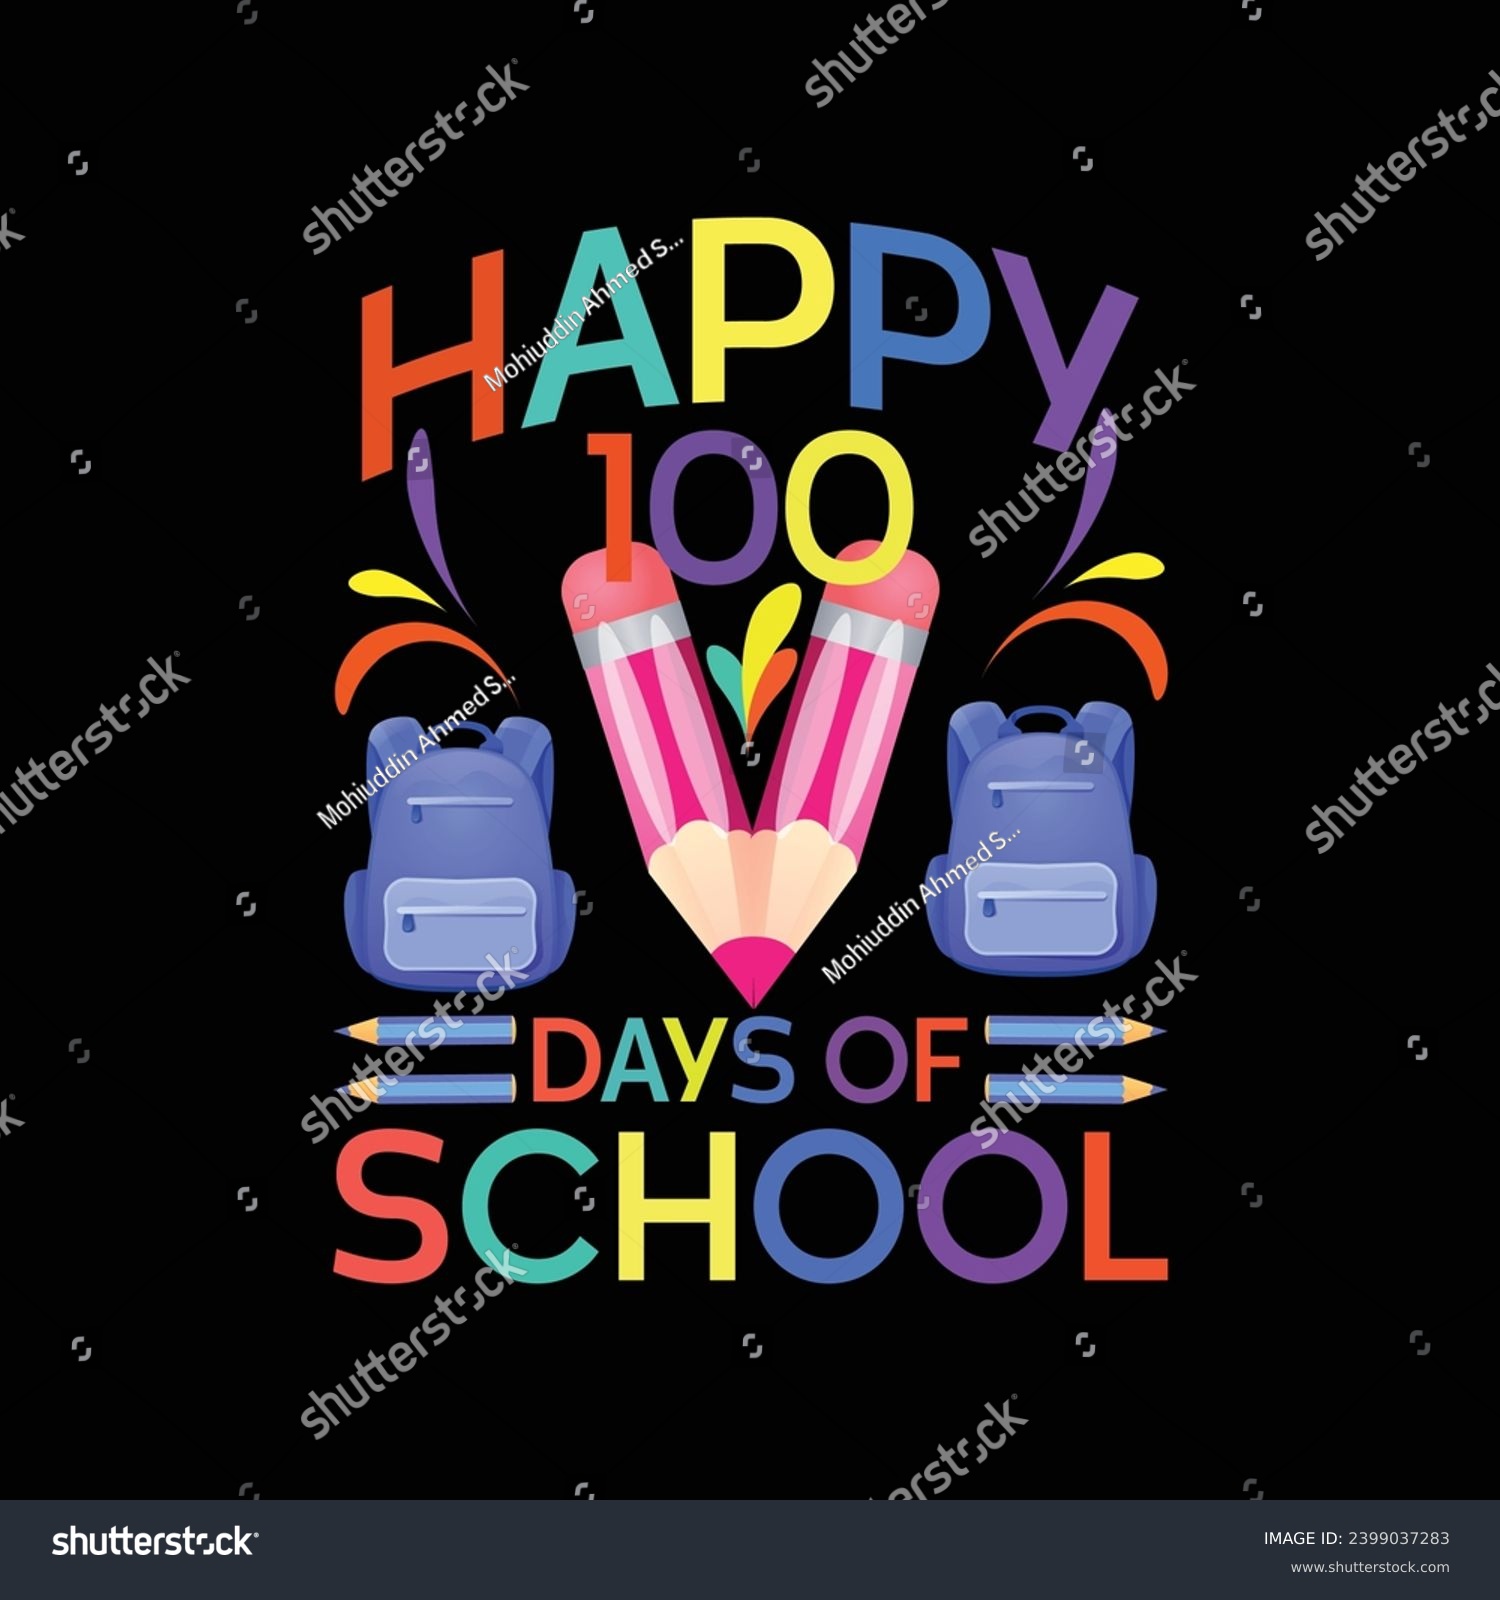 SVG of Happy 100 Days Of School illustrations with patches for t-shirts and other uses svg